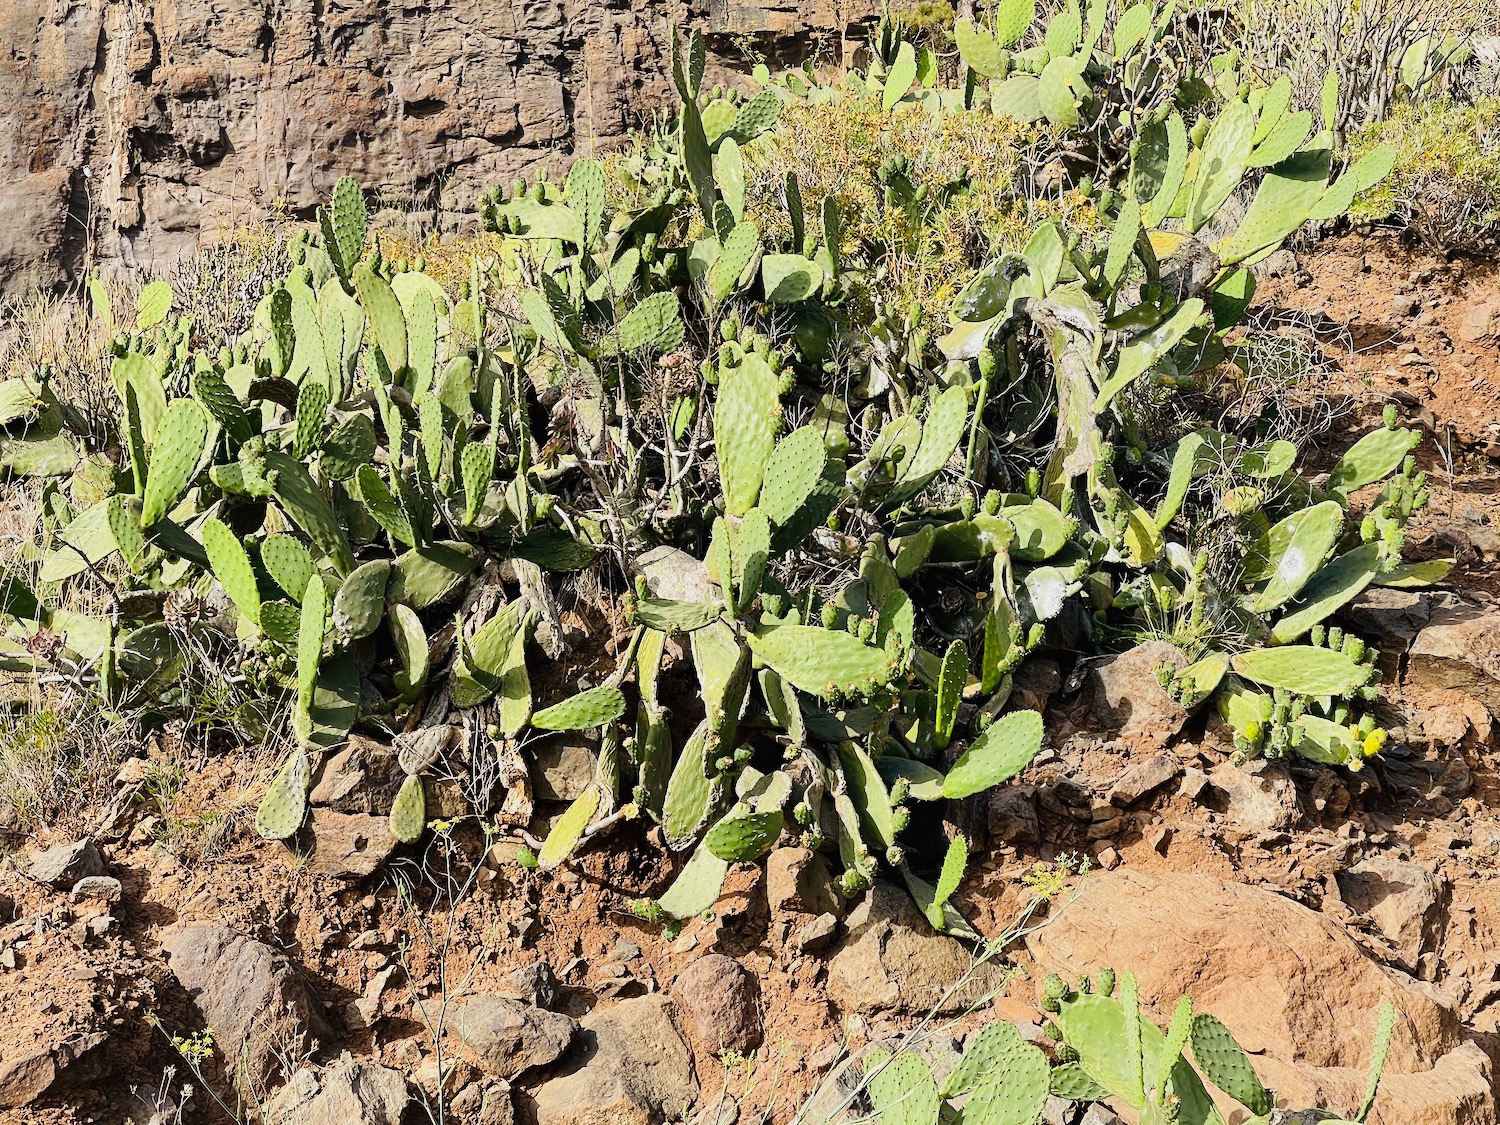 a cactus growing on a rocky hillside